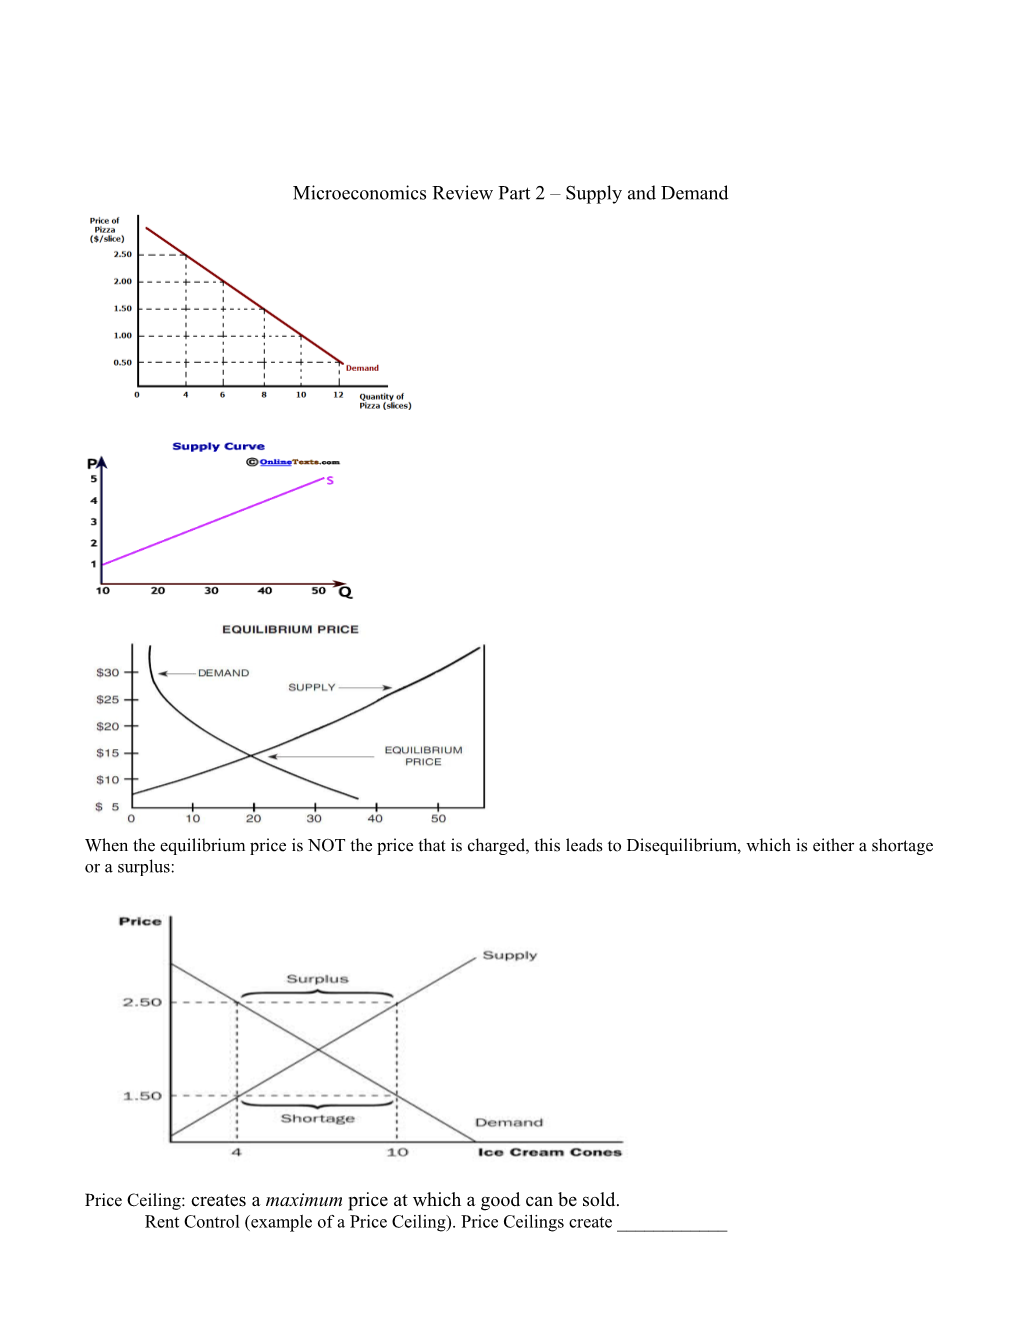 Microeconomics Review Part 2 Supply and Demand